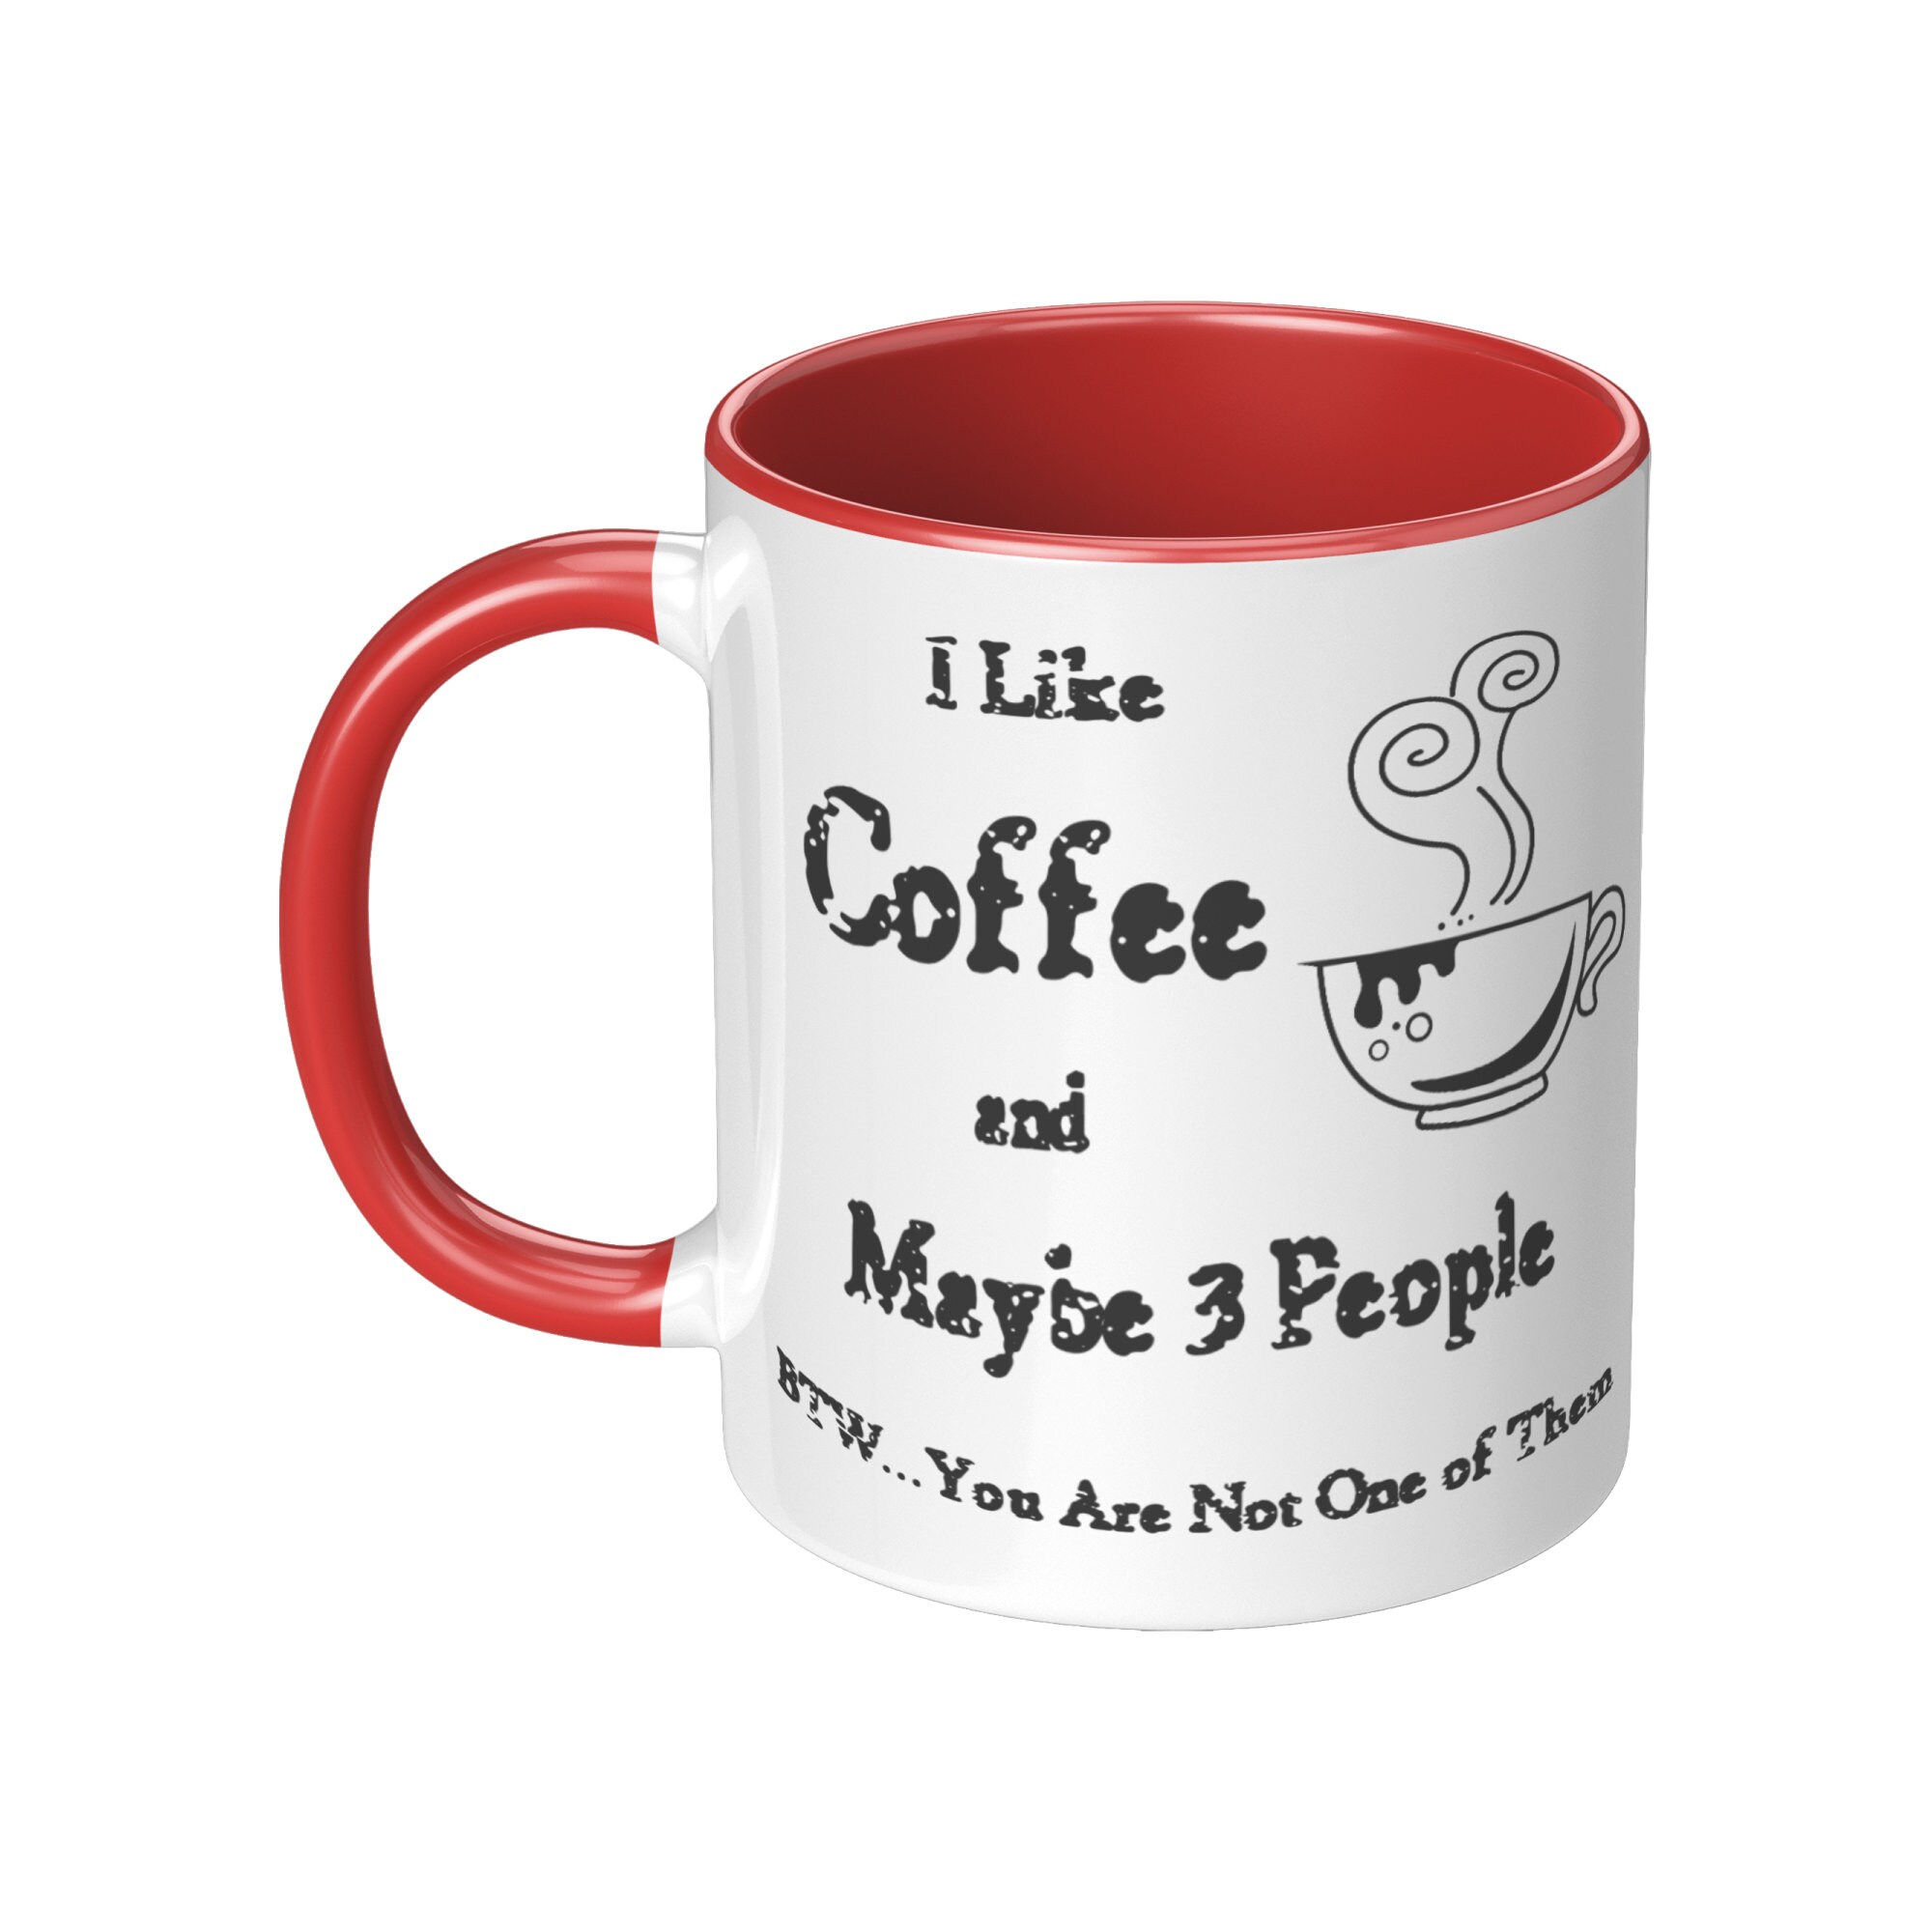 Coffee mug with a love message: Anywhere but with you! –